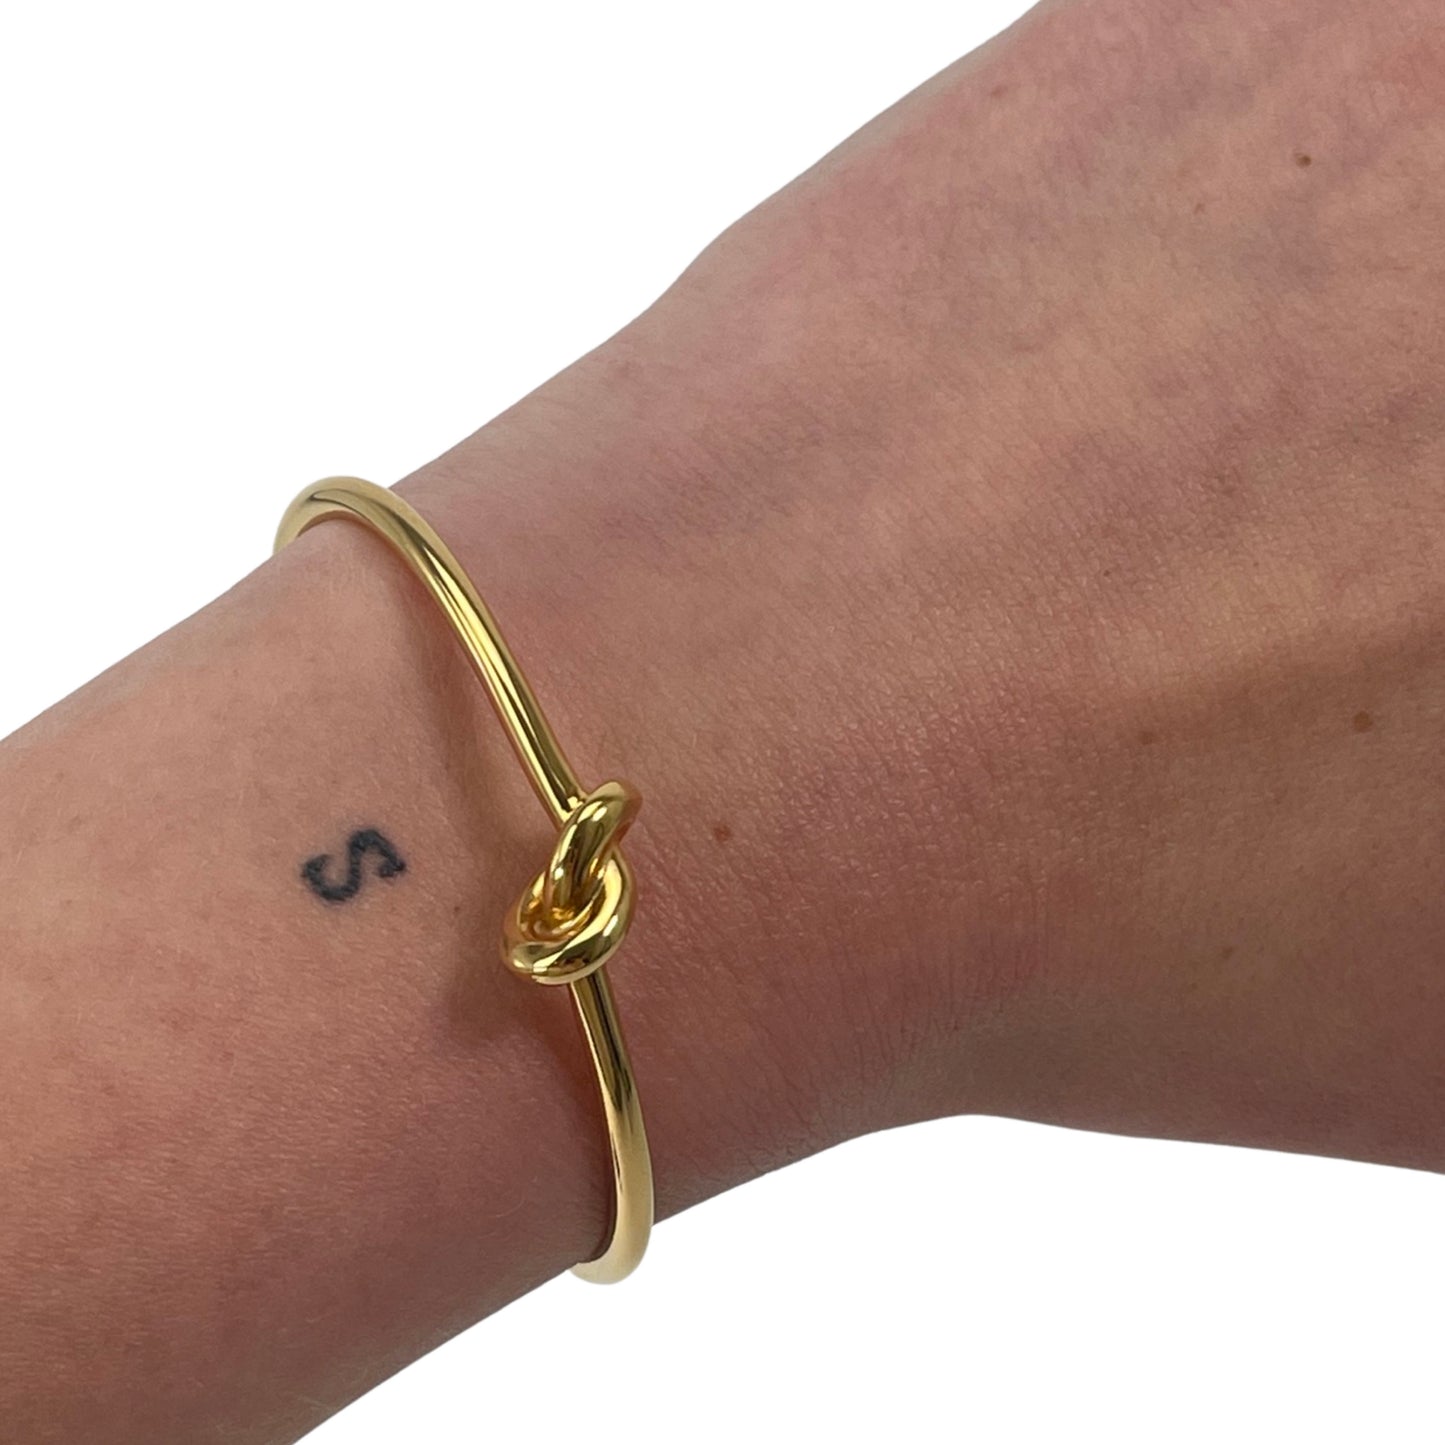 Celine Knot Extra-Thin Bracelet in Brass with Gold Finish